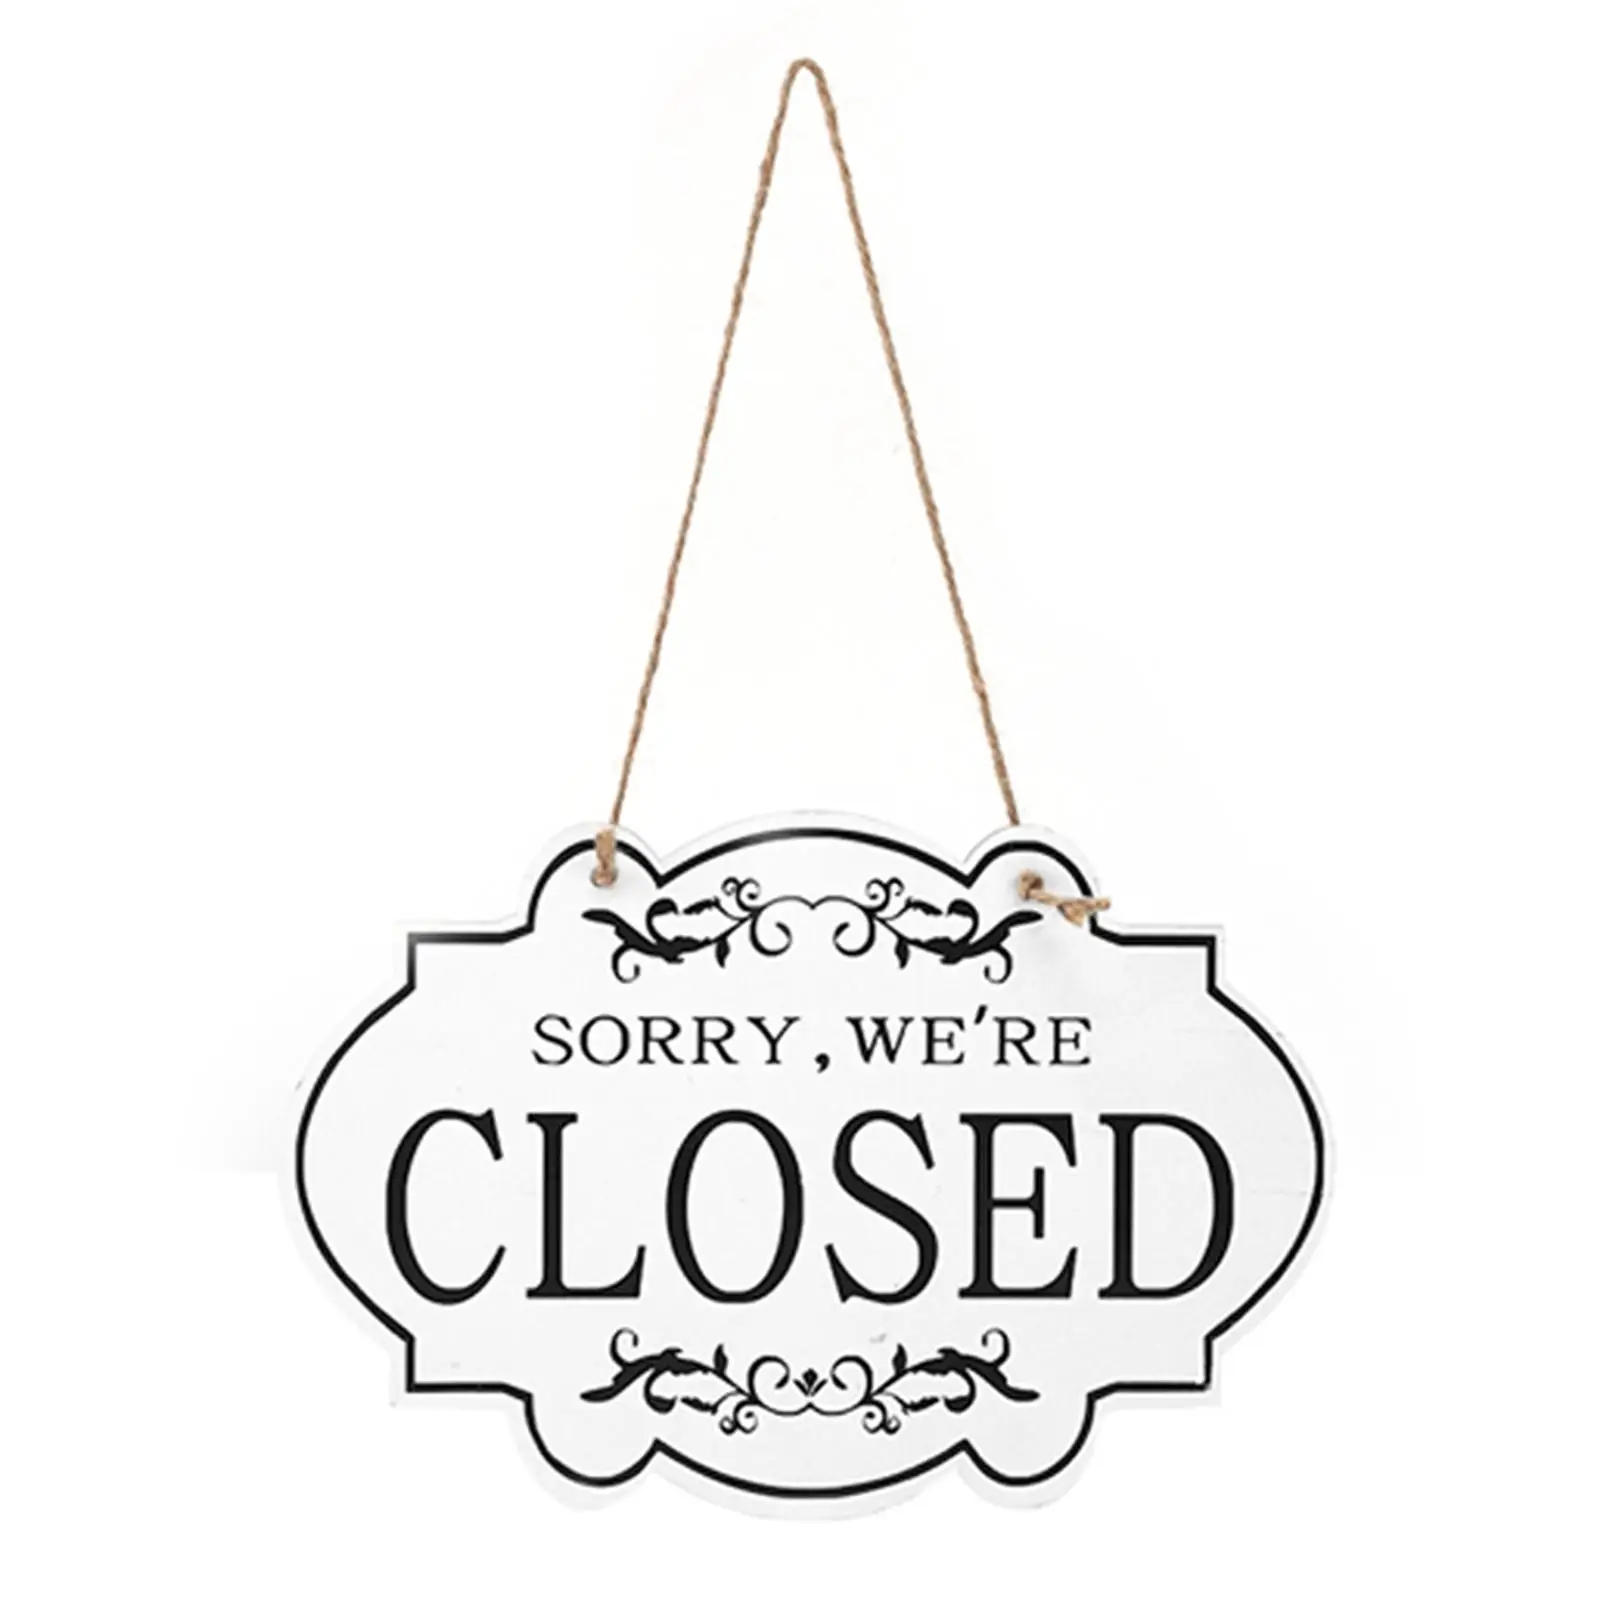 Double Sided Open and Closed Door Sign Business Sign Rustic Reversible Hanger Wood for Home Cafe Shop Farmhouse Porch Decoration